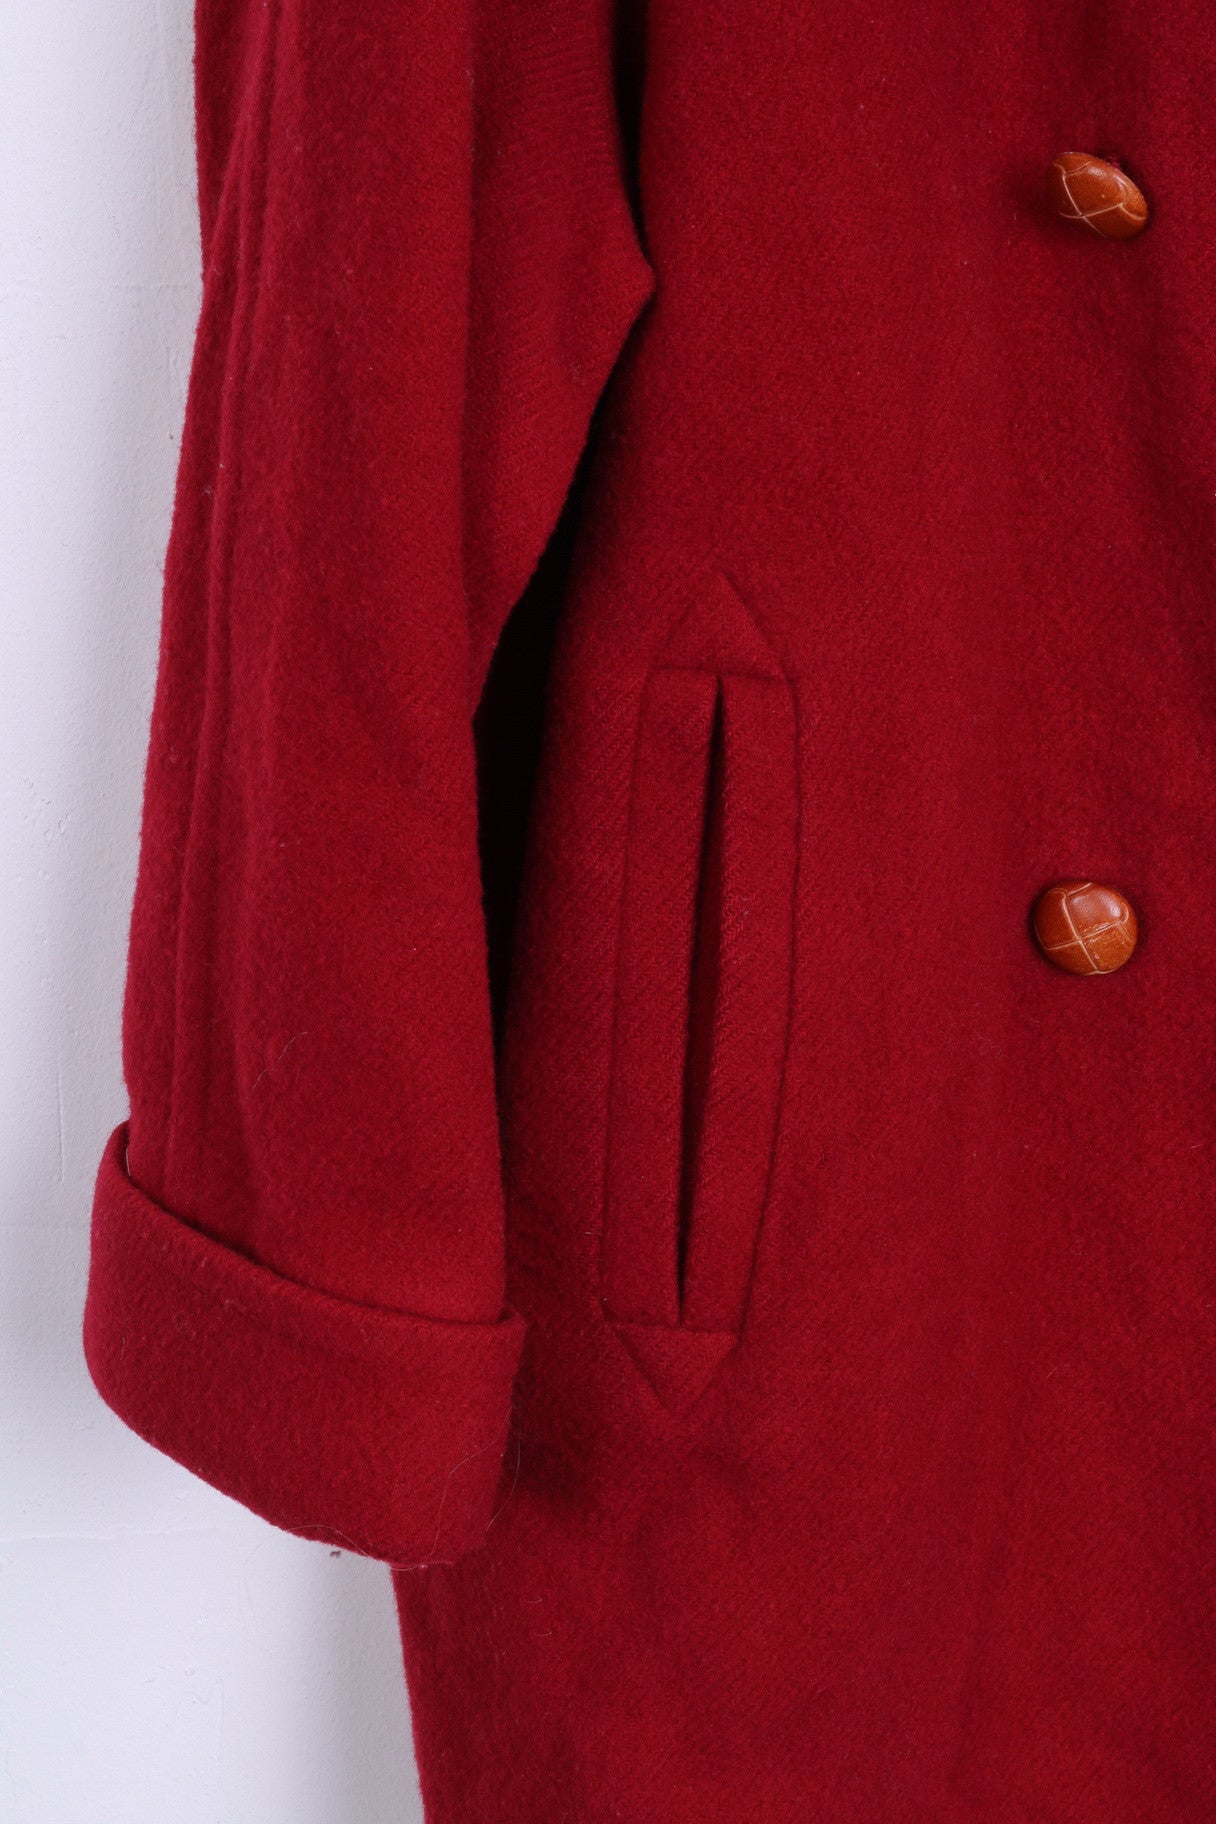 ESSENTIALS Womens 16 XL Jacket Coat Wool Double Breasted Red - RetrospectClothes